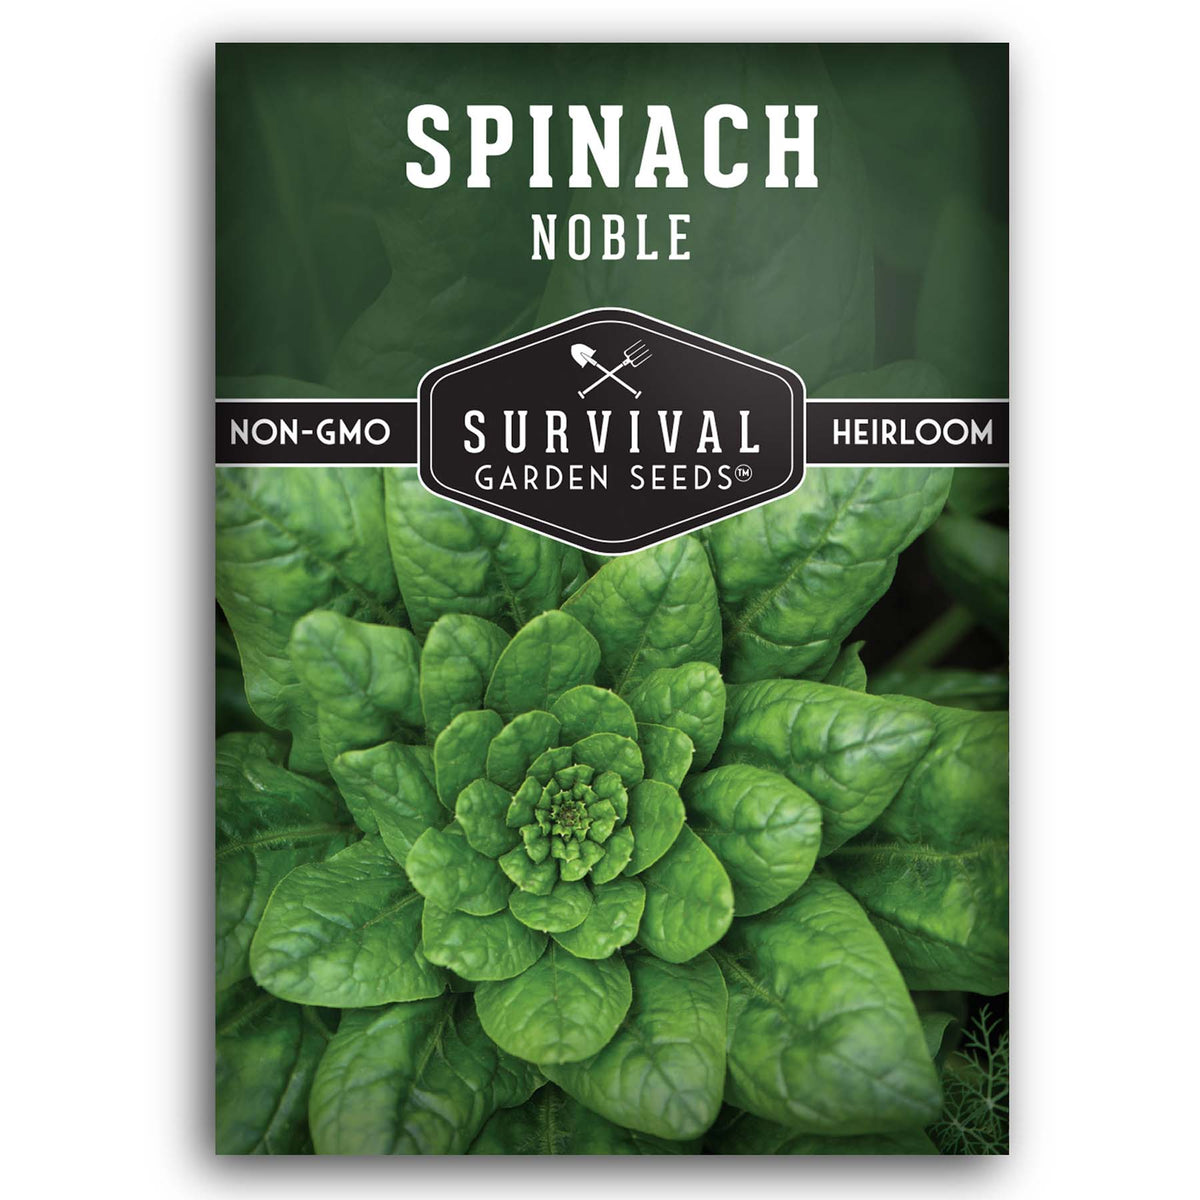 Noble Giant Spinach seeds for planting